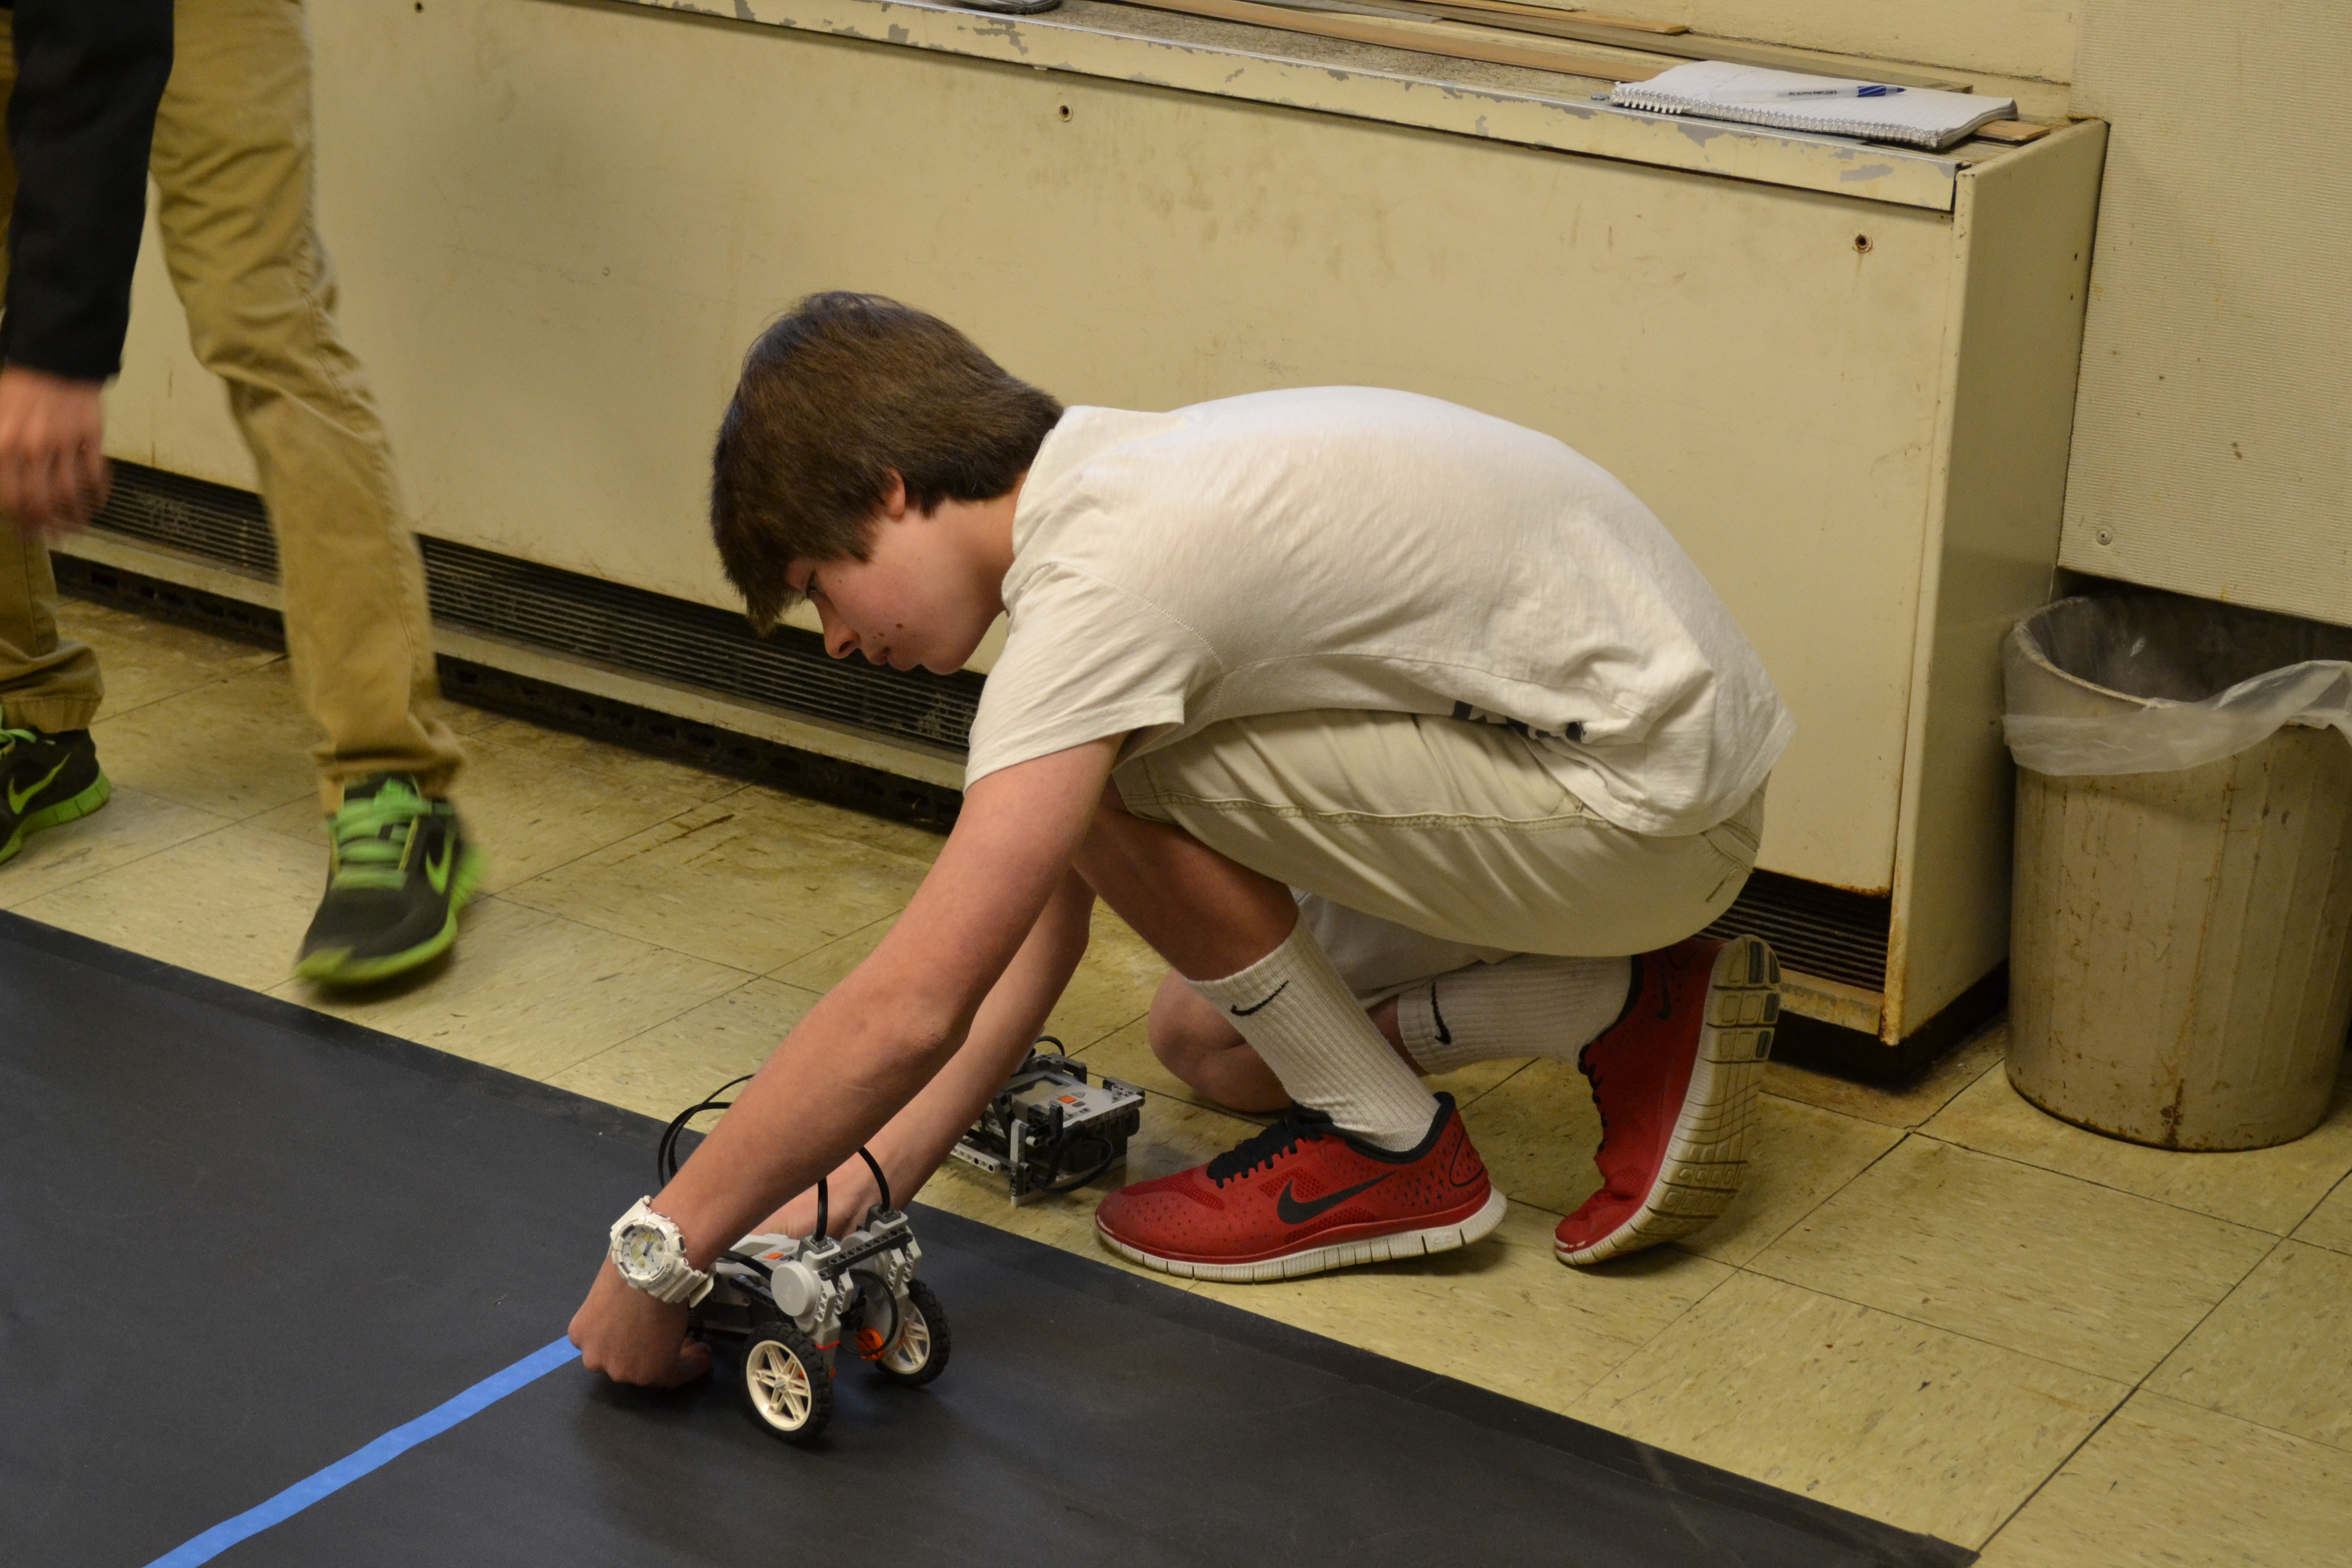 Freshman Andrew Whittington goes through the obstacle course with his robot.